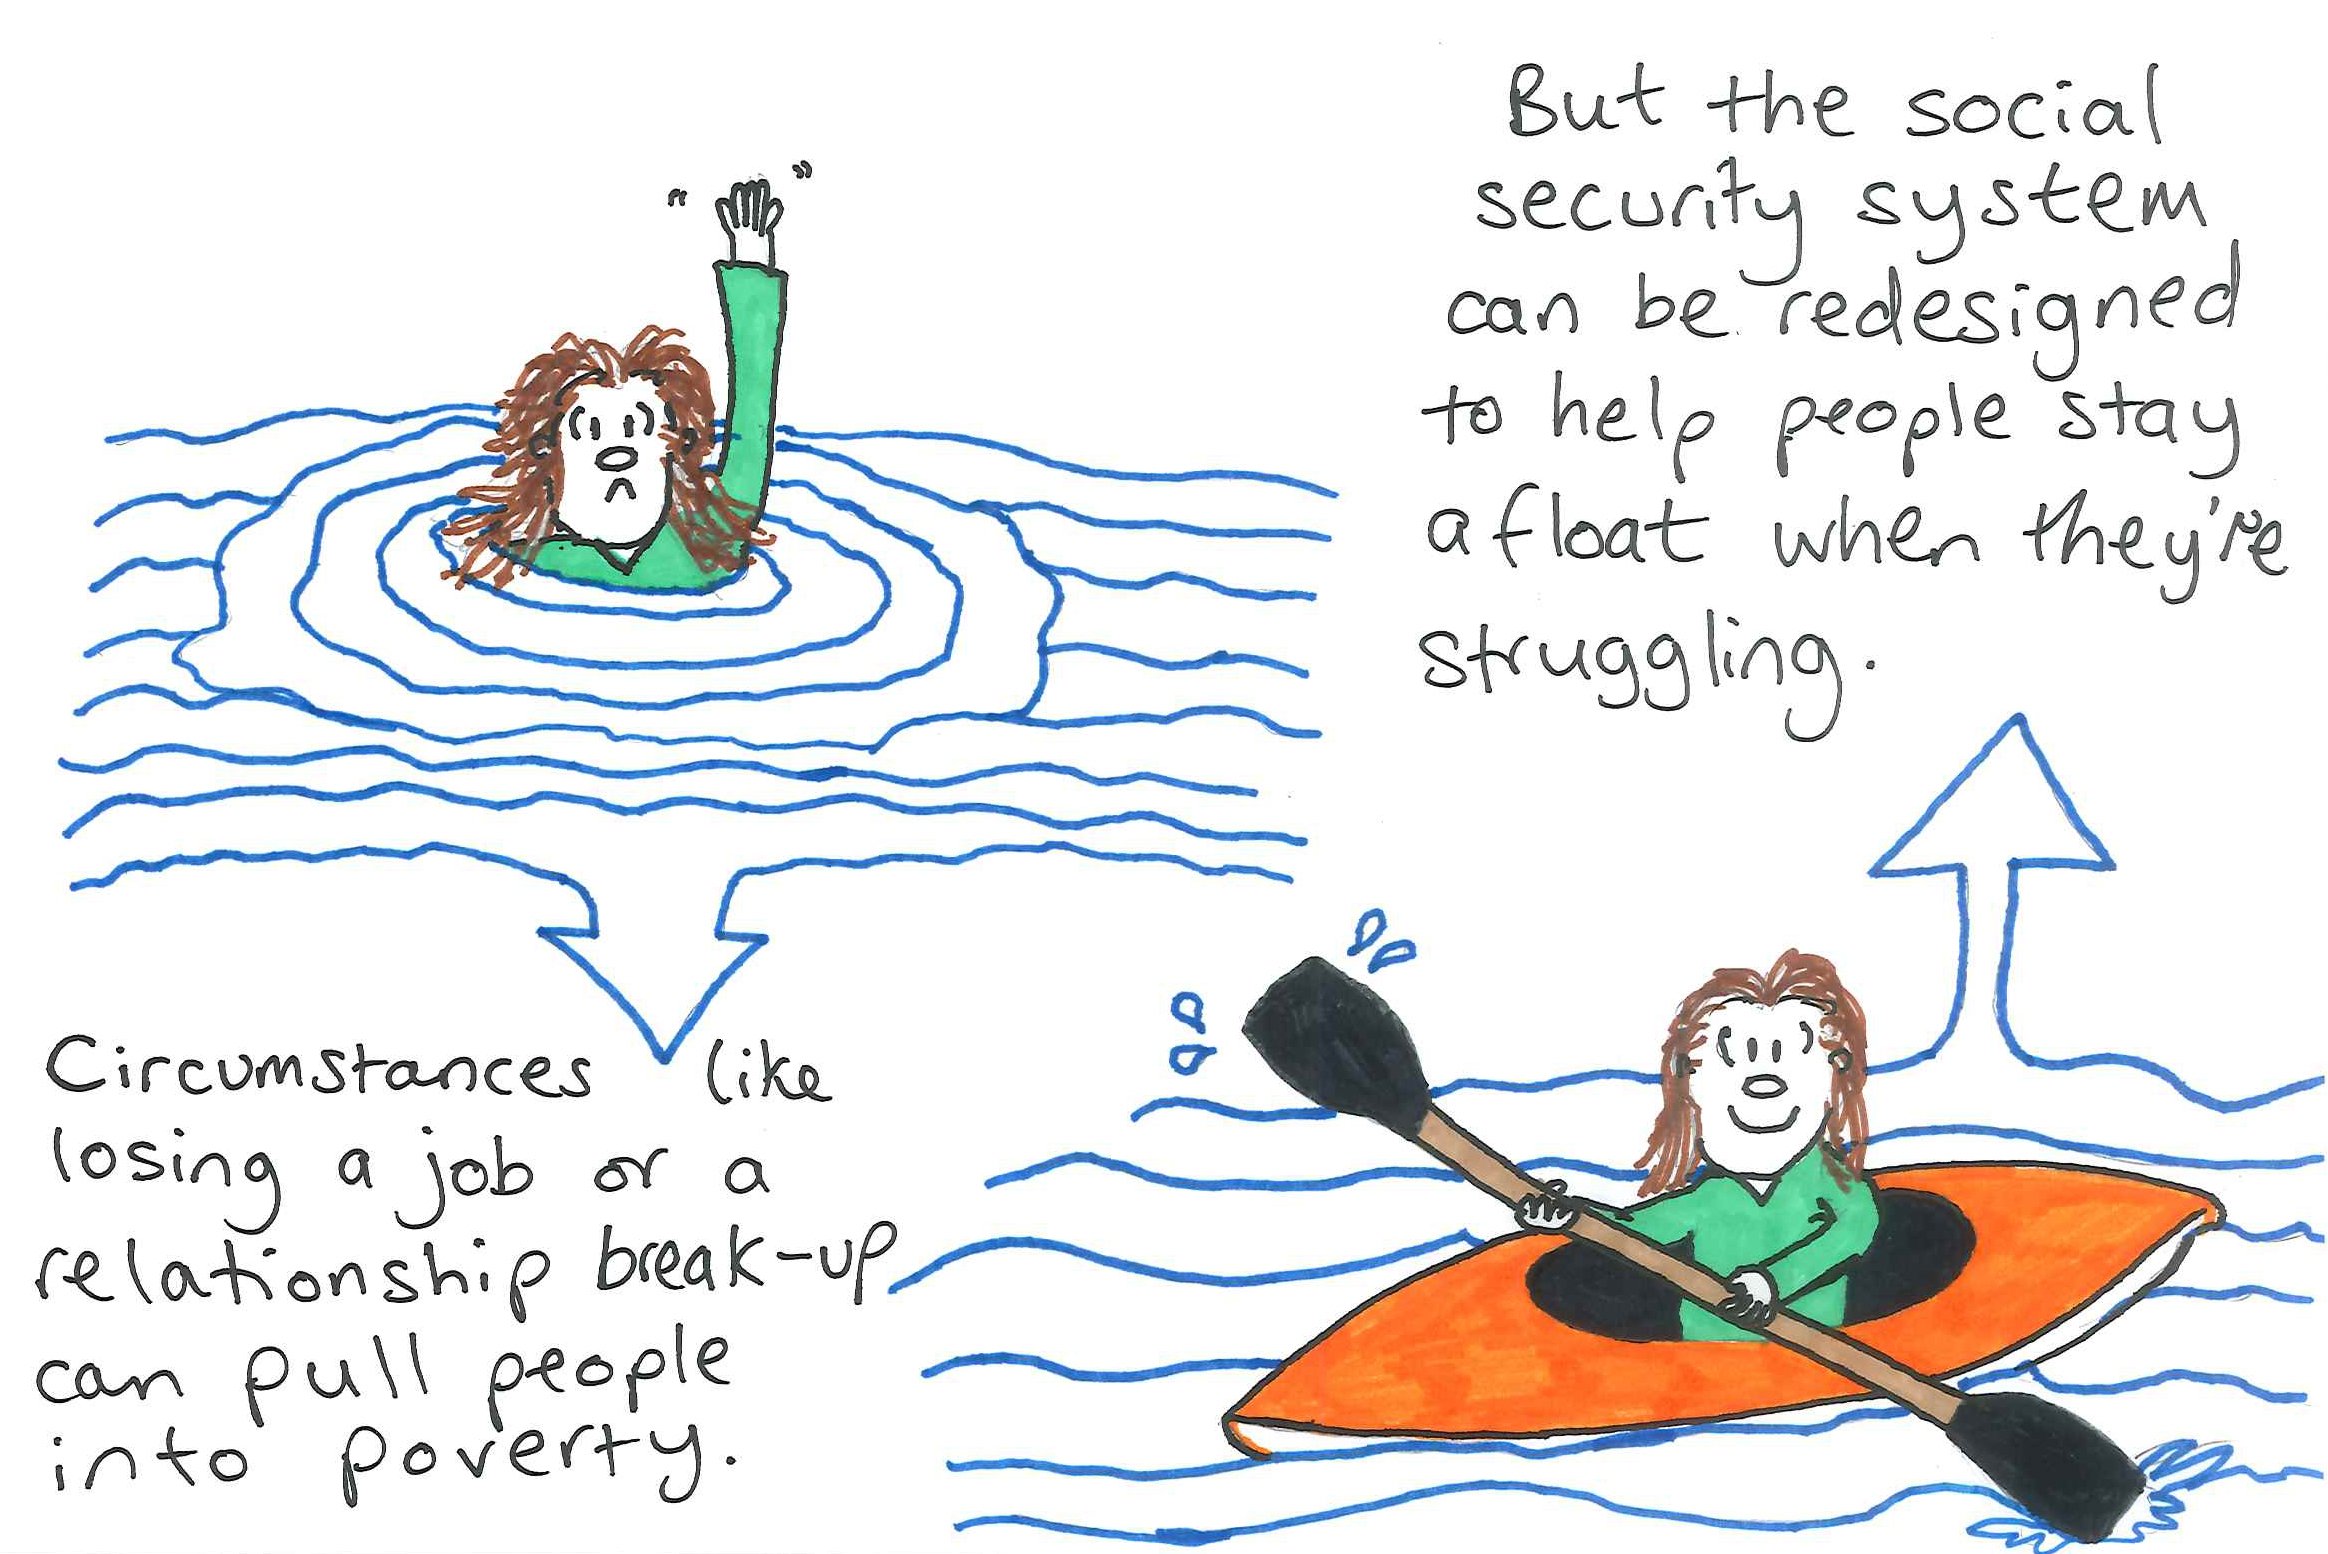 Illustration of woman drowning next to her in a canoe